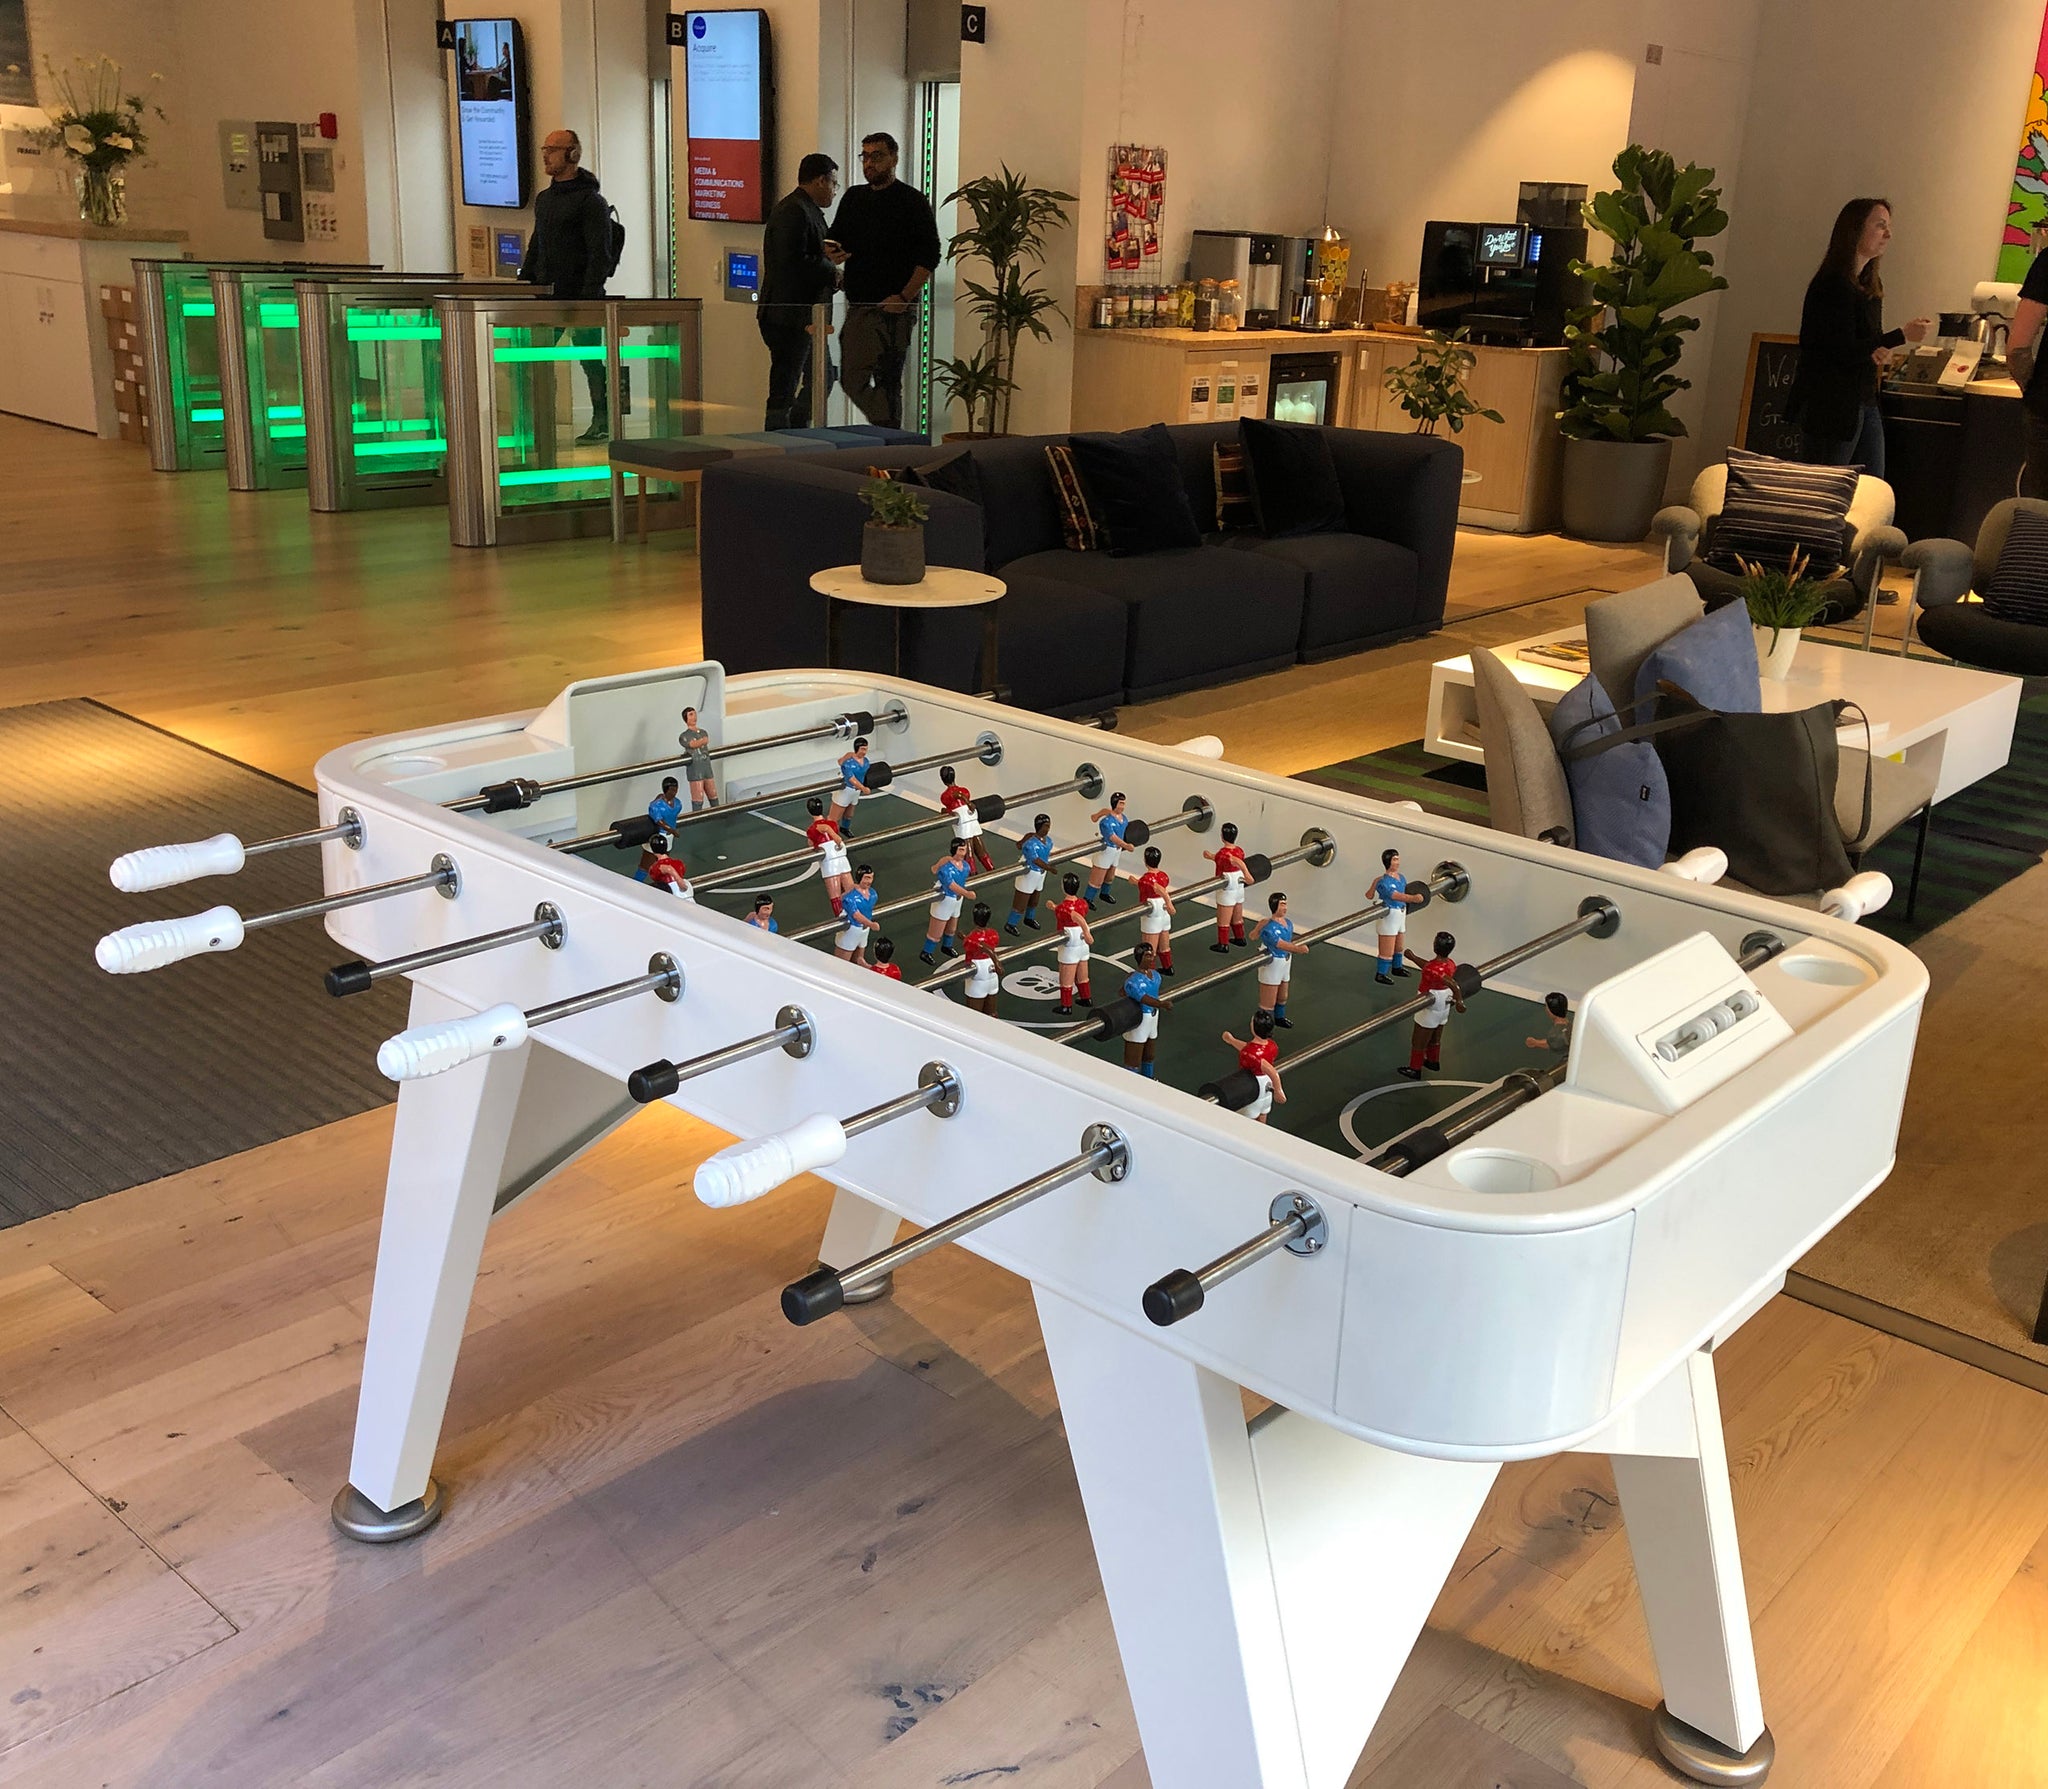 4 top reasons why foosball is one of the most underrated games